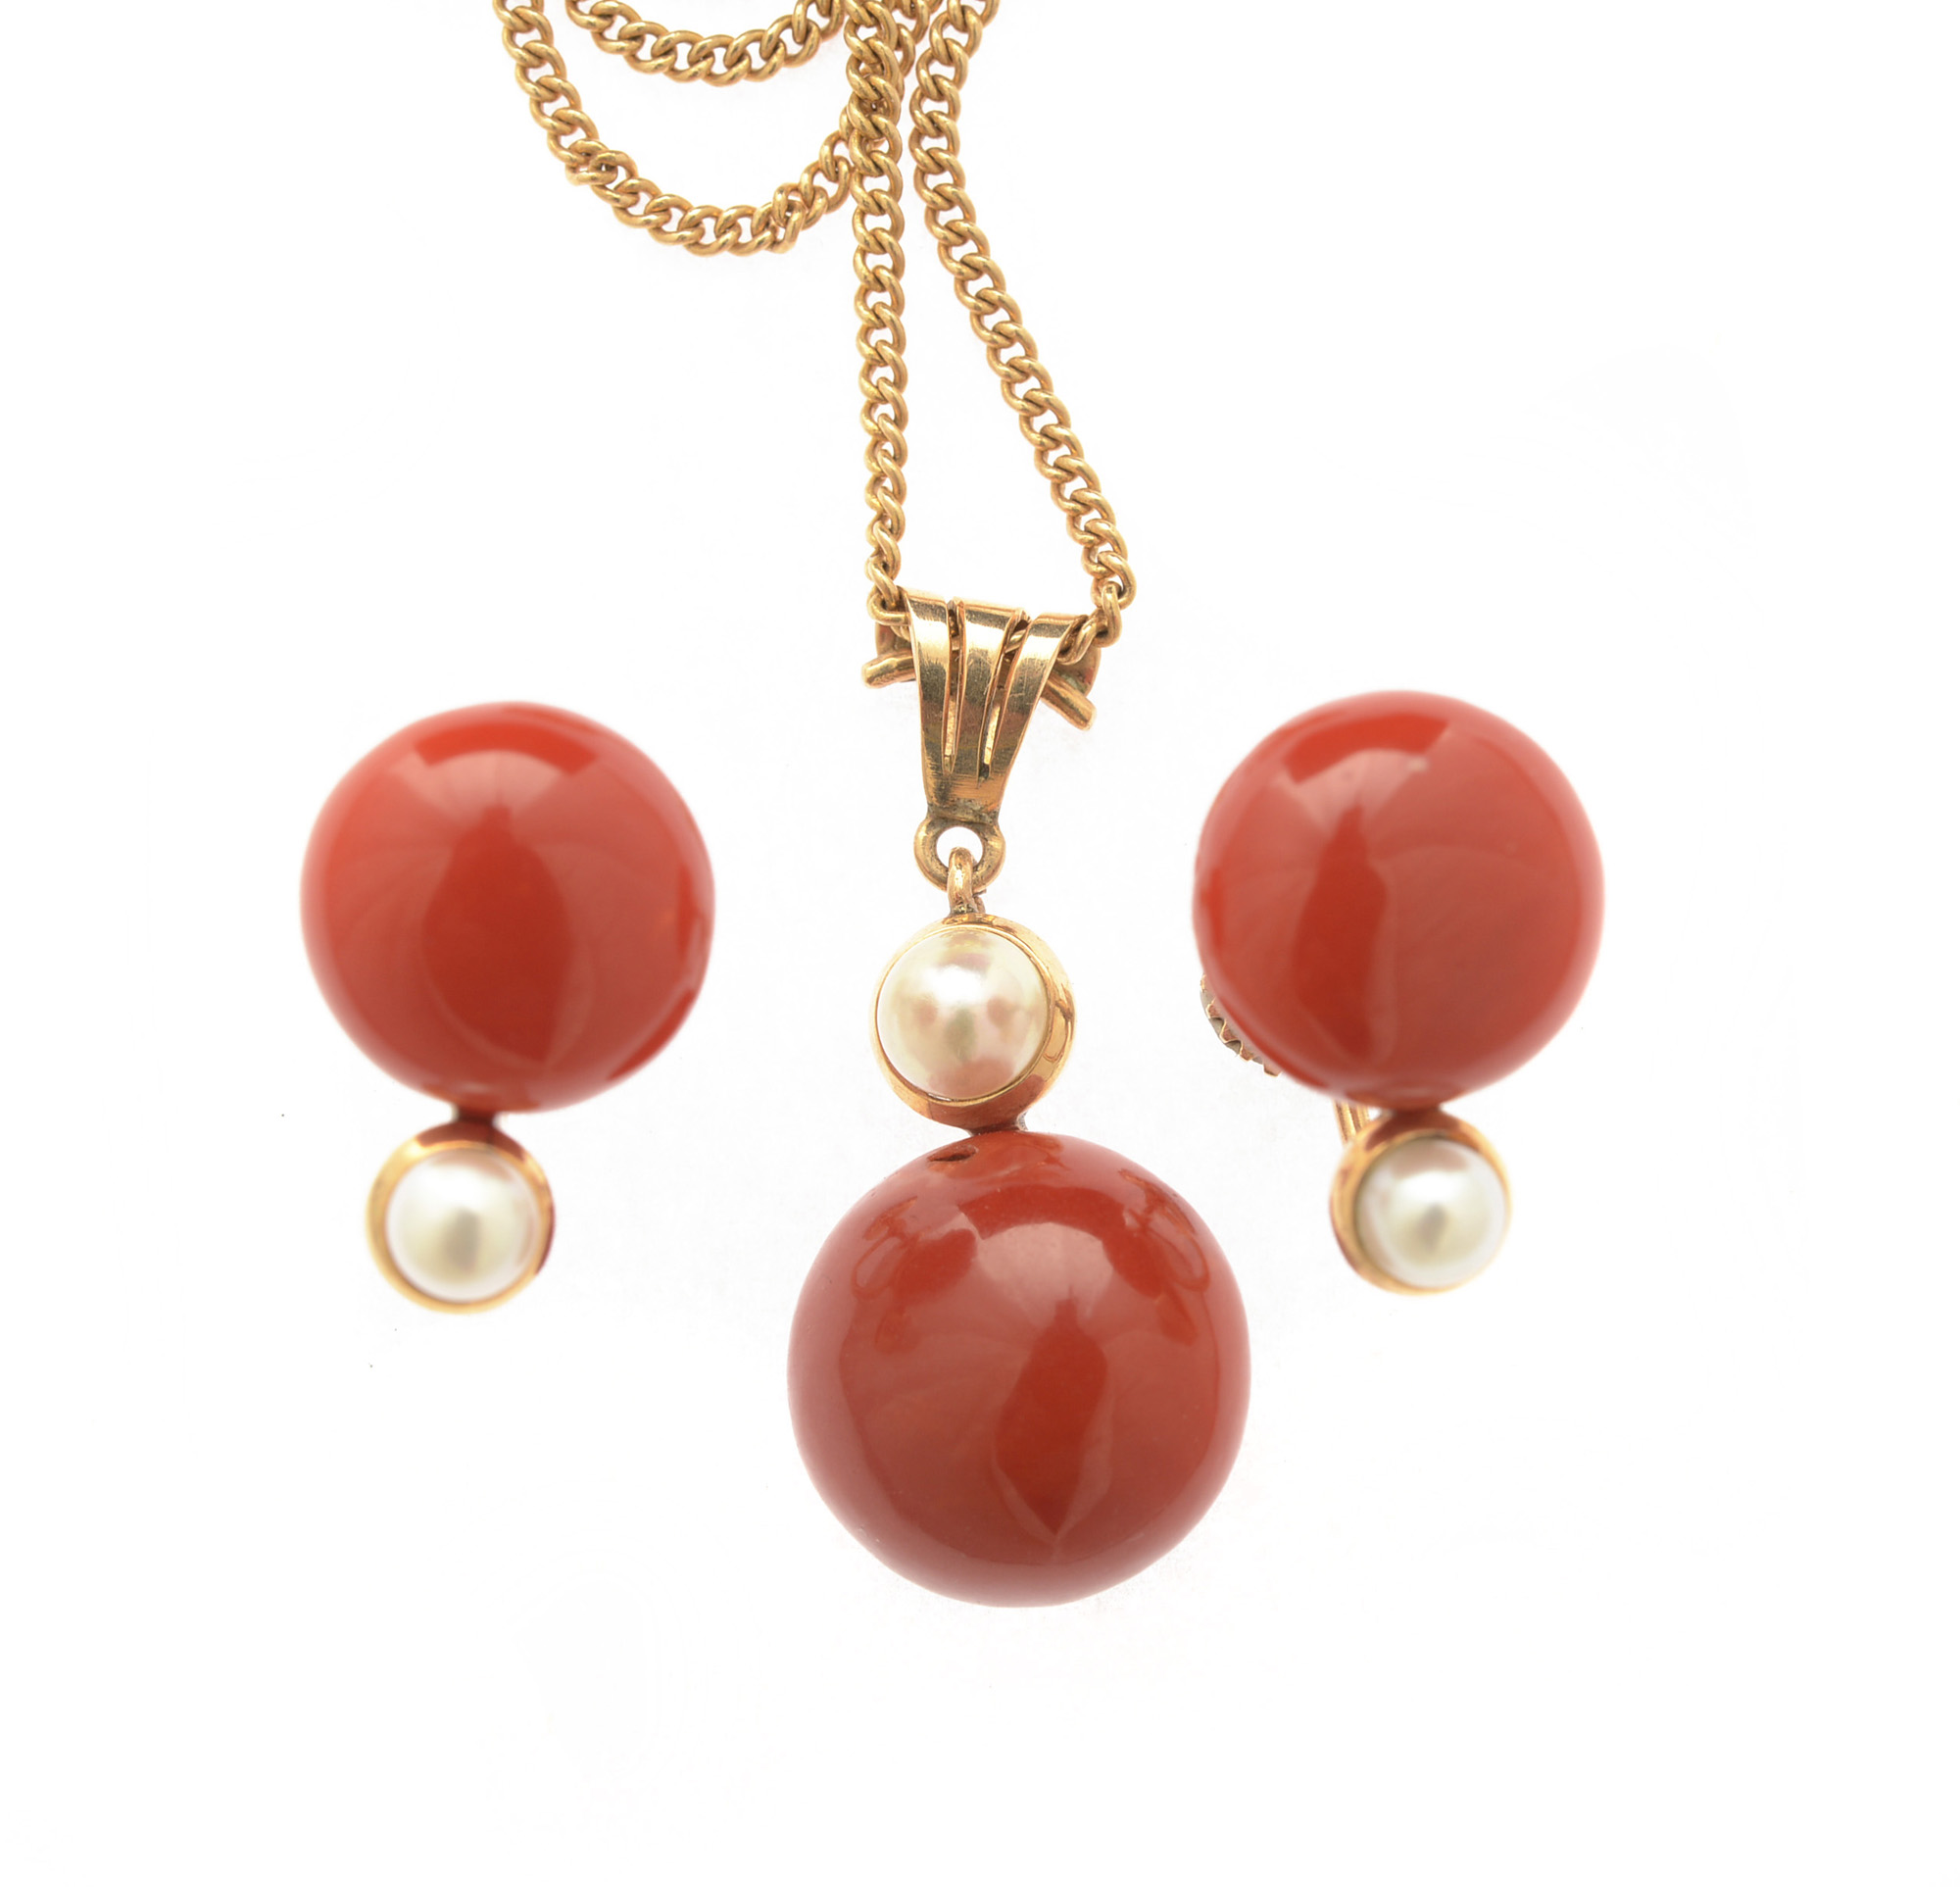 Coral, cultured pearl, 14K yellow gold jewelry suite. Price realized: $1,770. Michaan's image